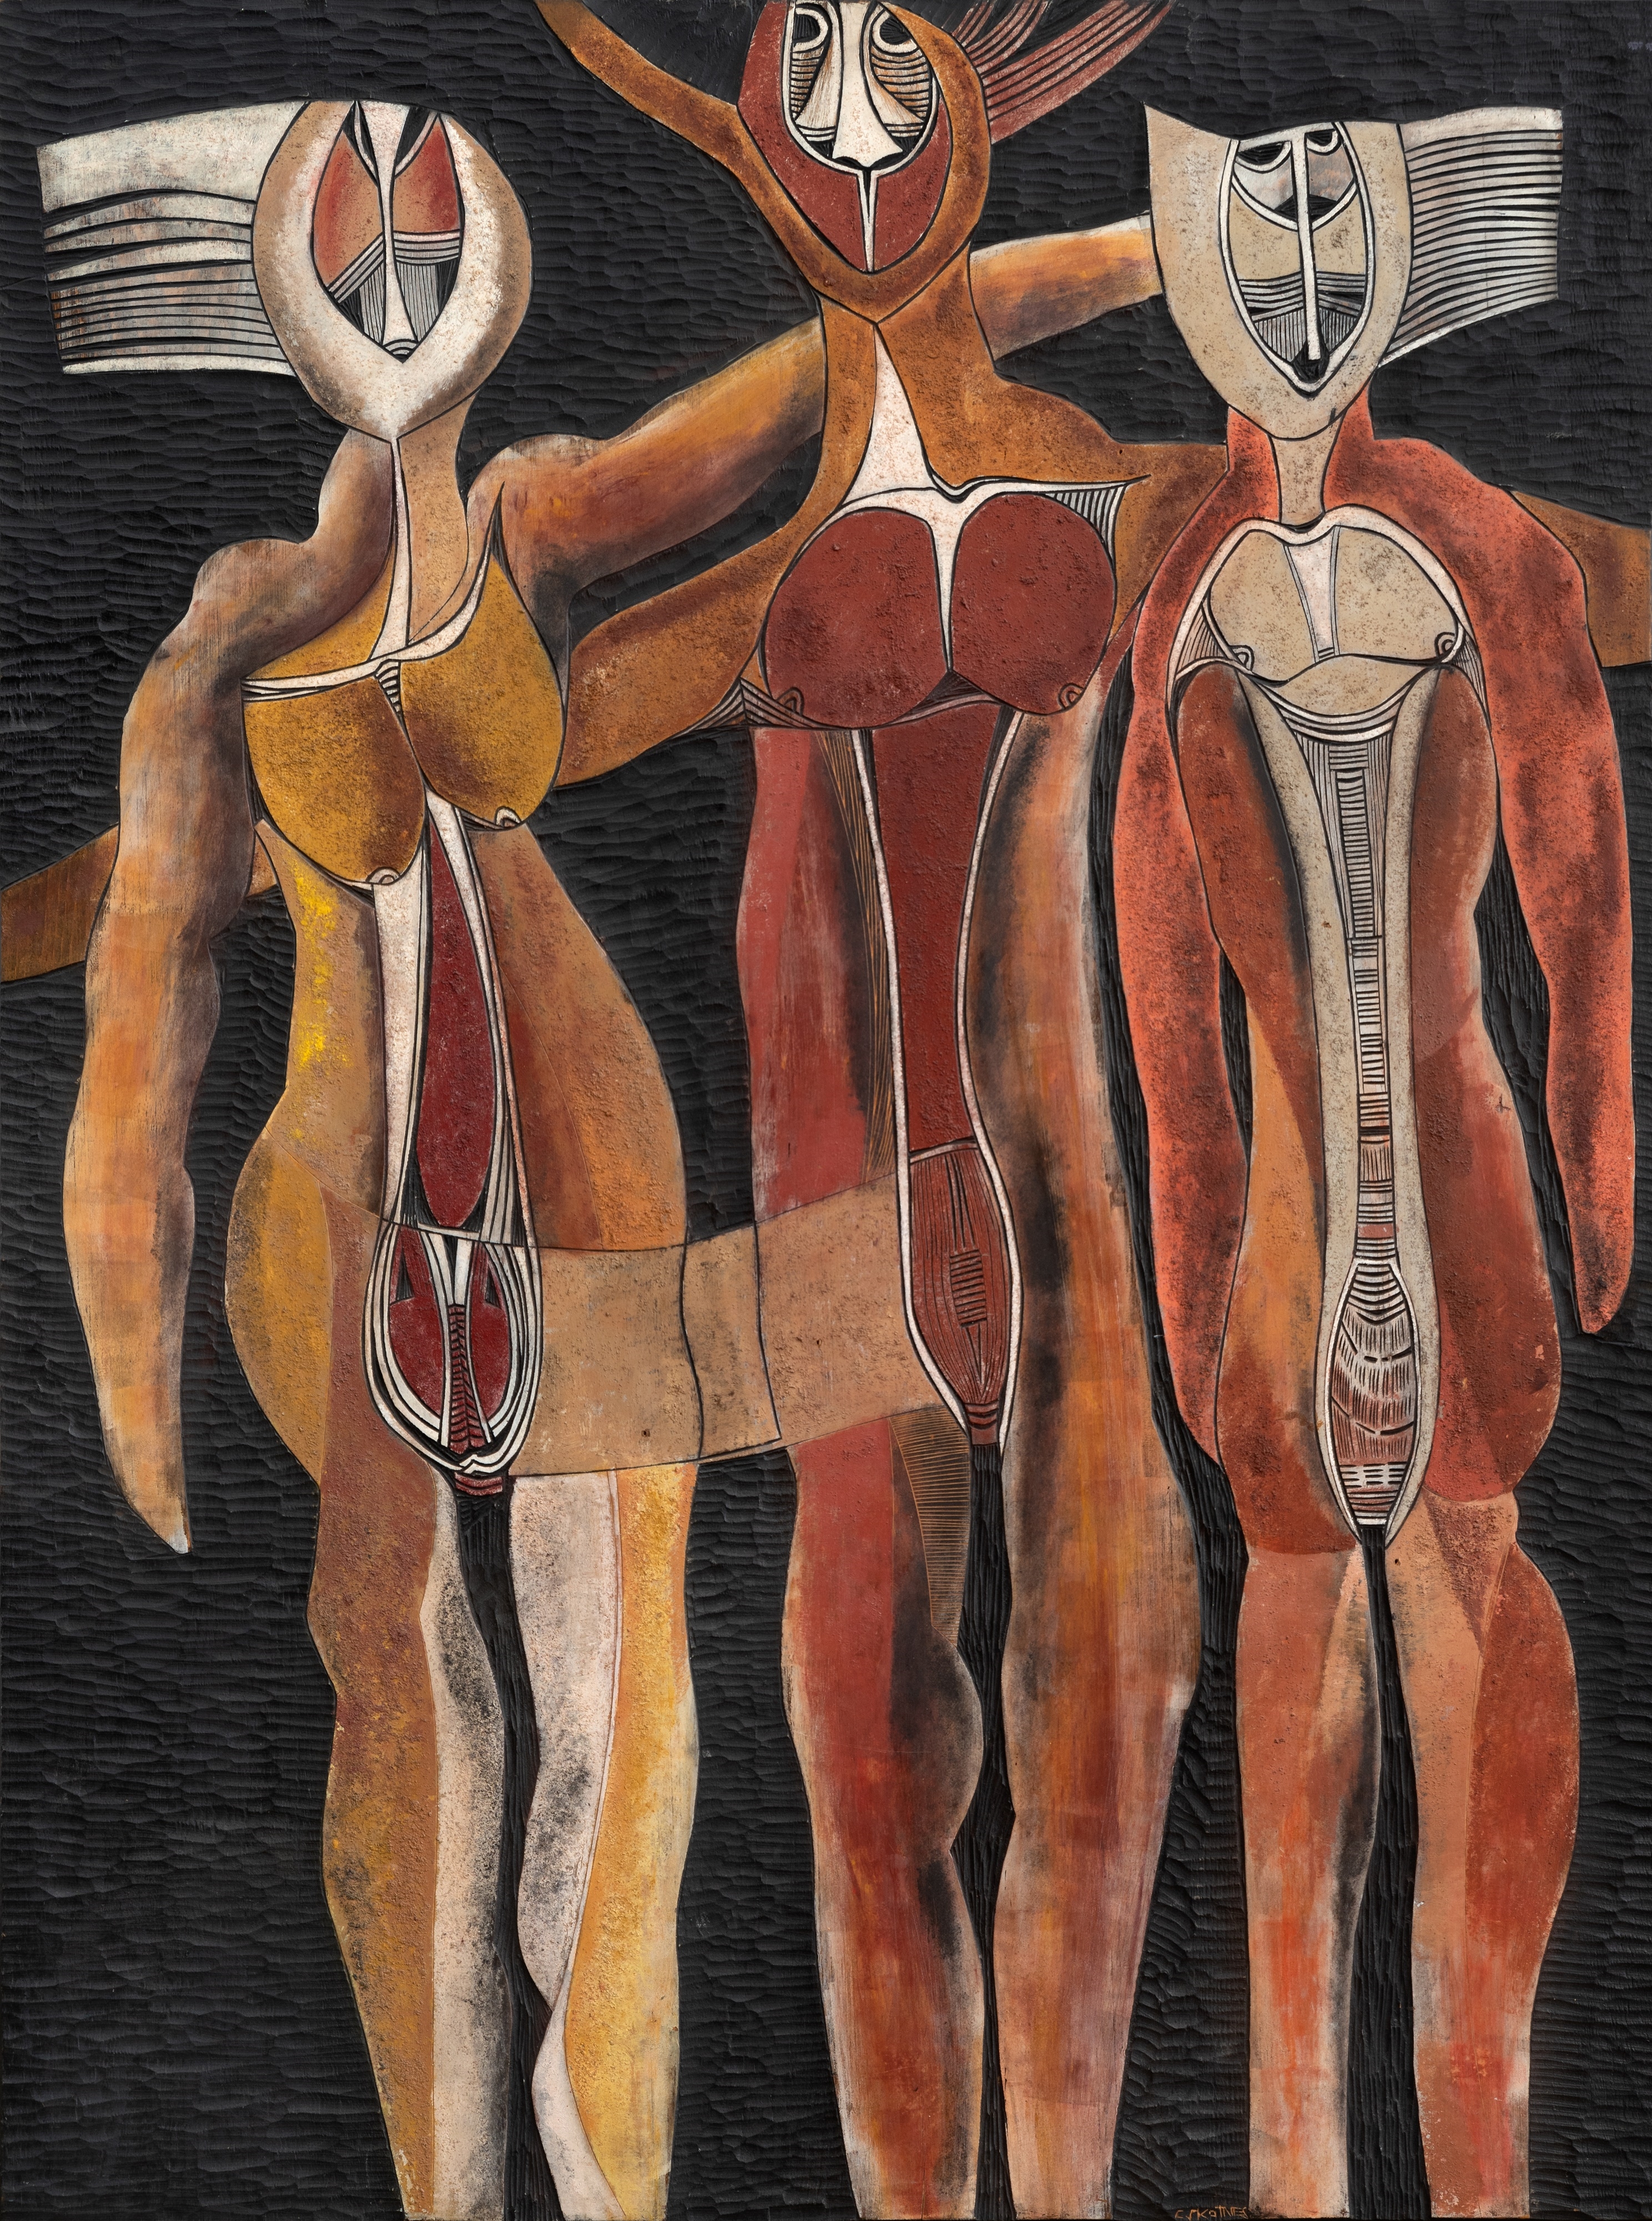 Artwork by Cecil Skotnes, Figure Composition, Made of carved, incised and painted wood panel